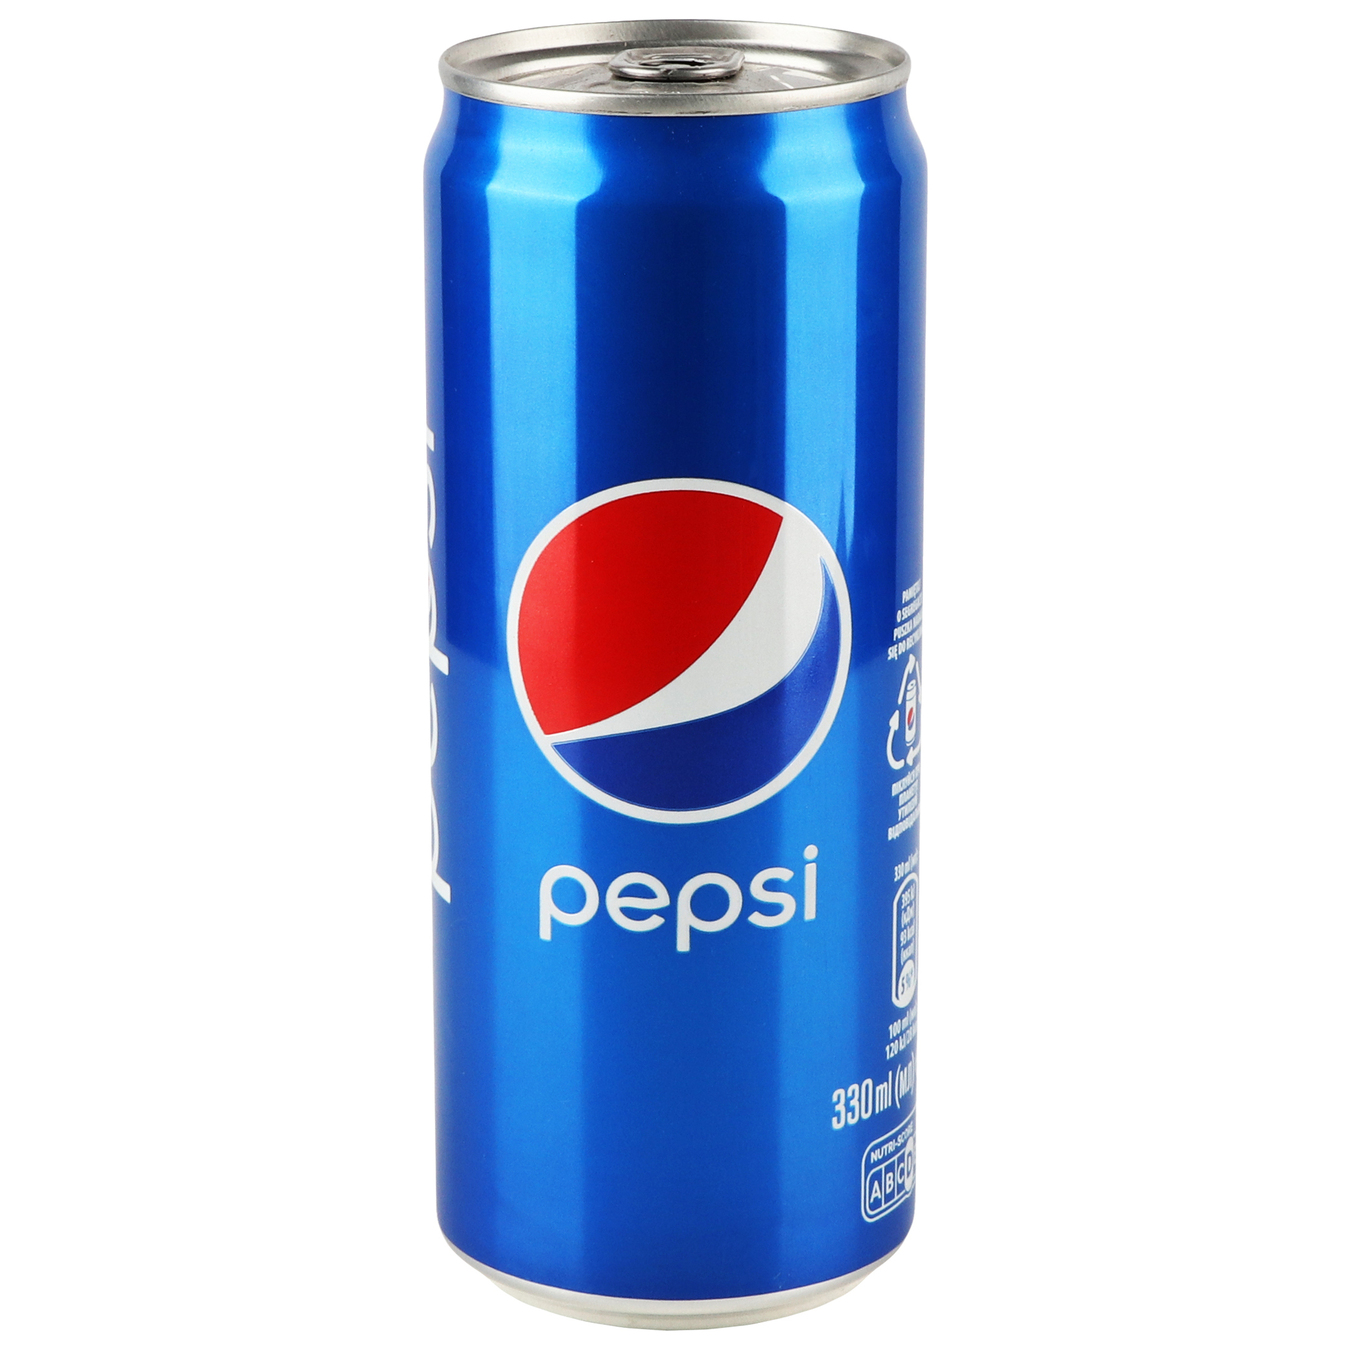 Pepsi carbonated drink 330ml can 2